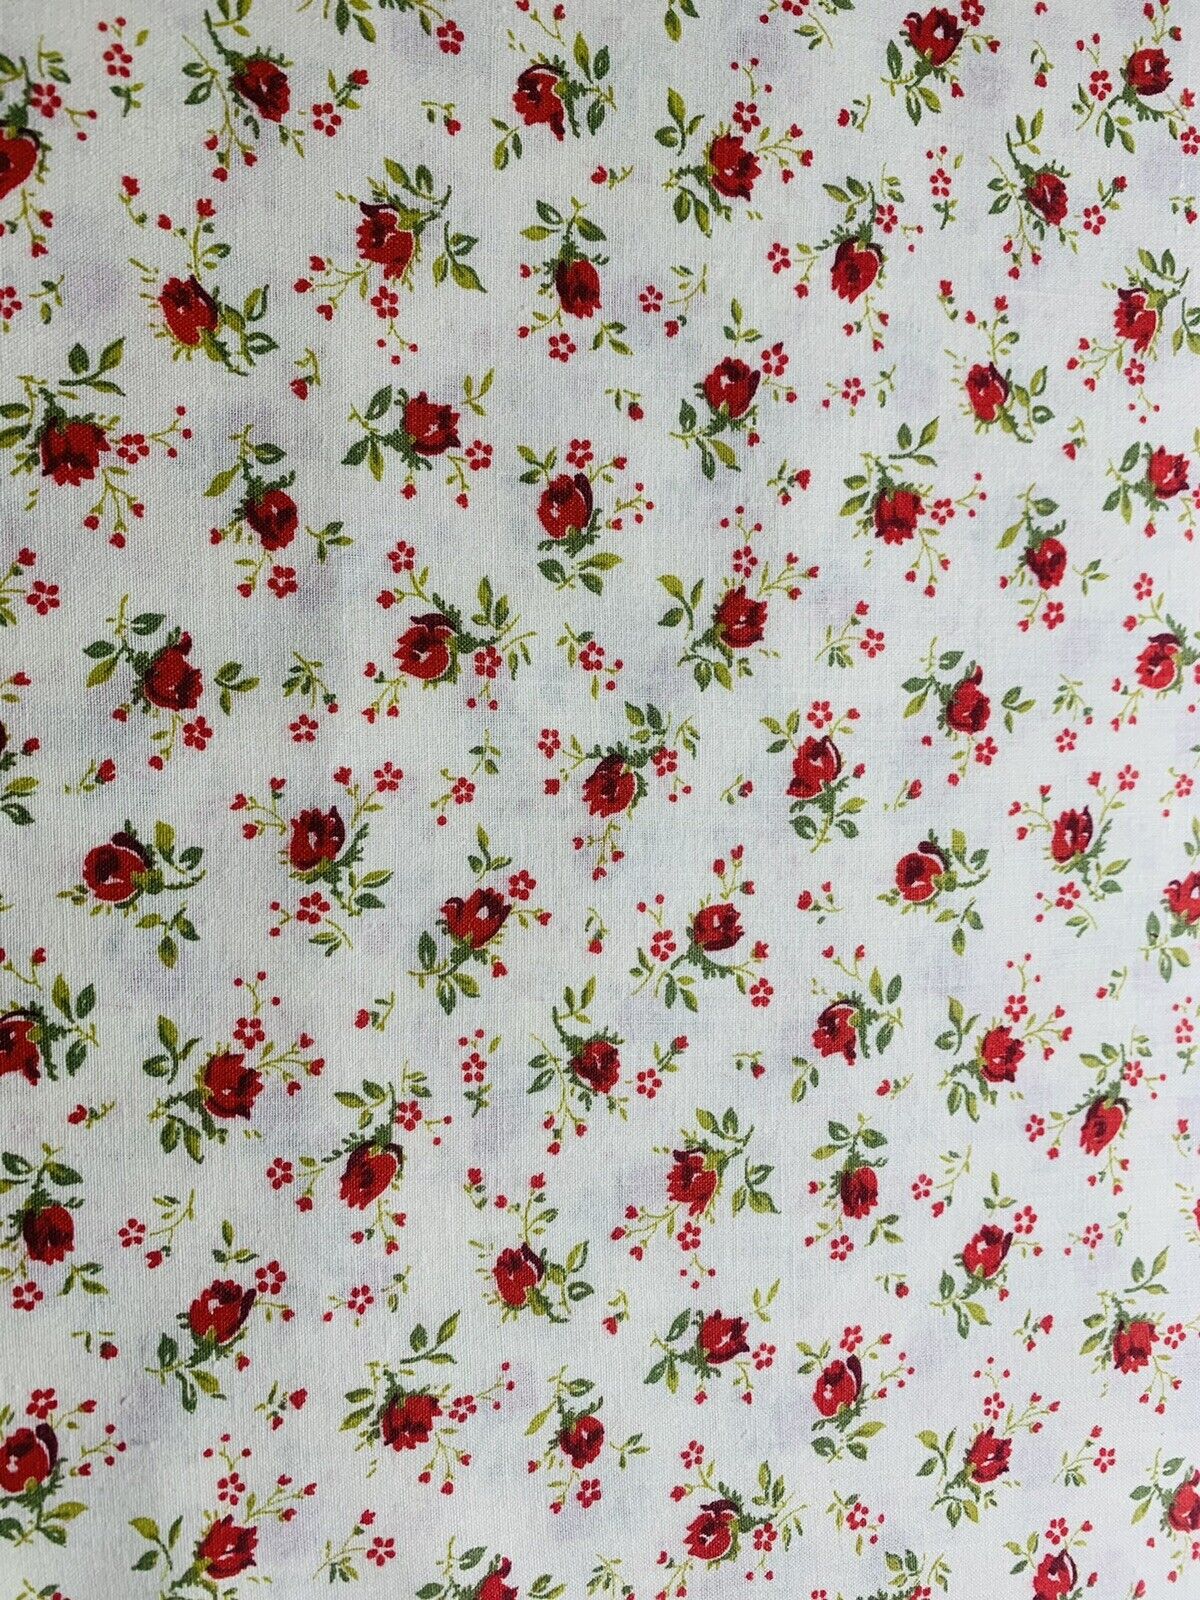 Vintage 1940-50s Authentic Tiny Red Rose Cotton Fabric 36” Wide BTY